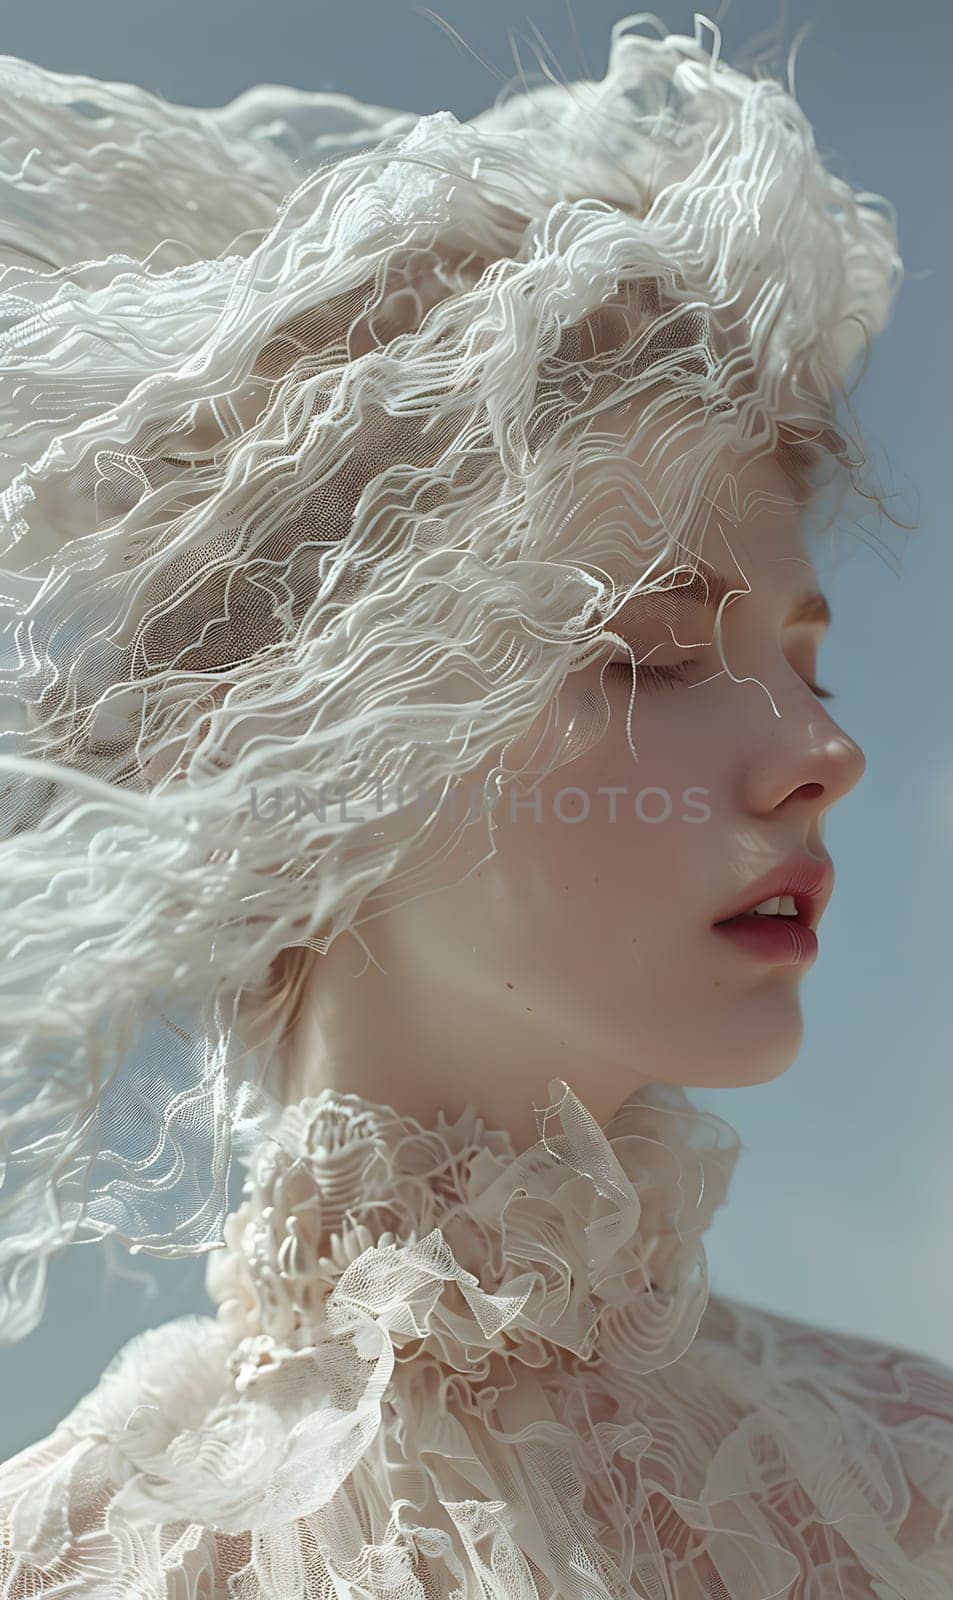 A closeup shot capturing a womans face with white hair blowing in the wind, showcasing a beautiful fur hat as a fashion accessory